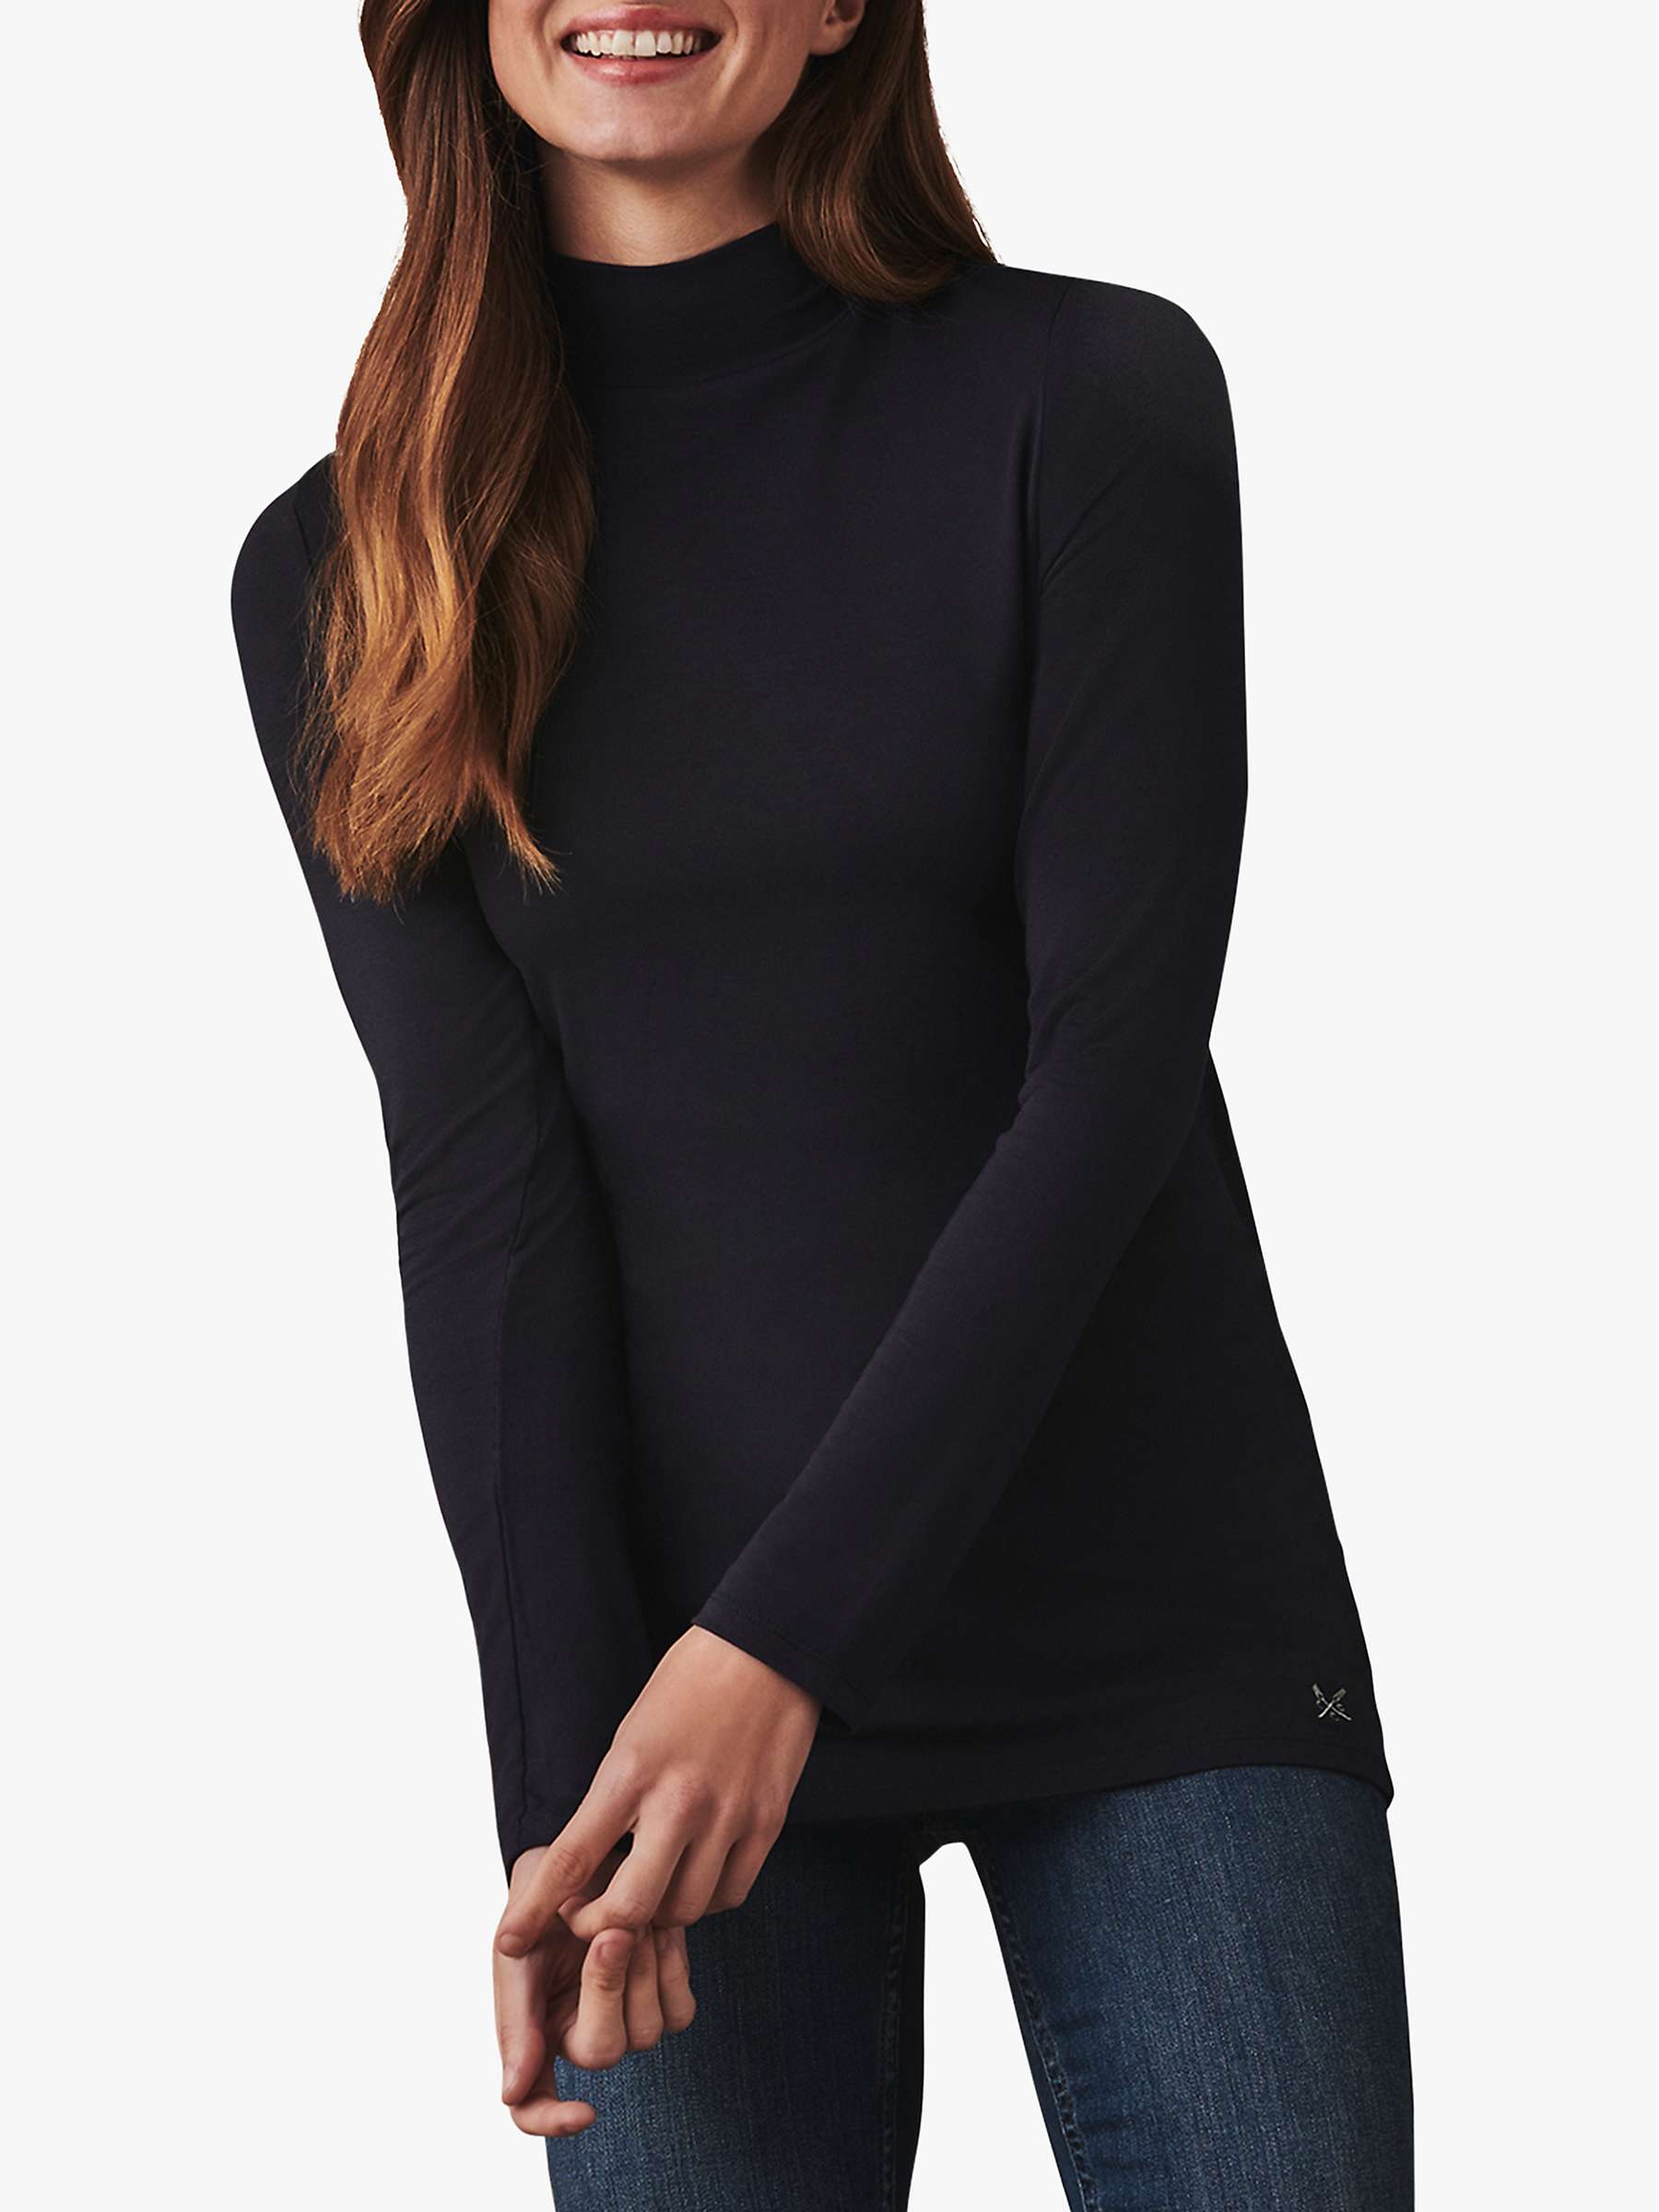 Buy Crew Clothing Second Skin Polo Neck Top, Navy Online at johnlewis.com